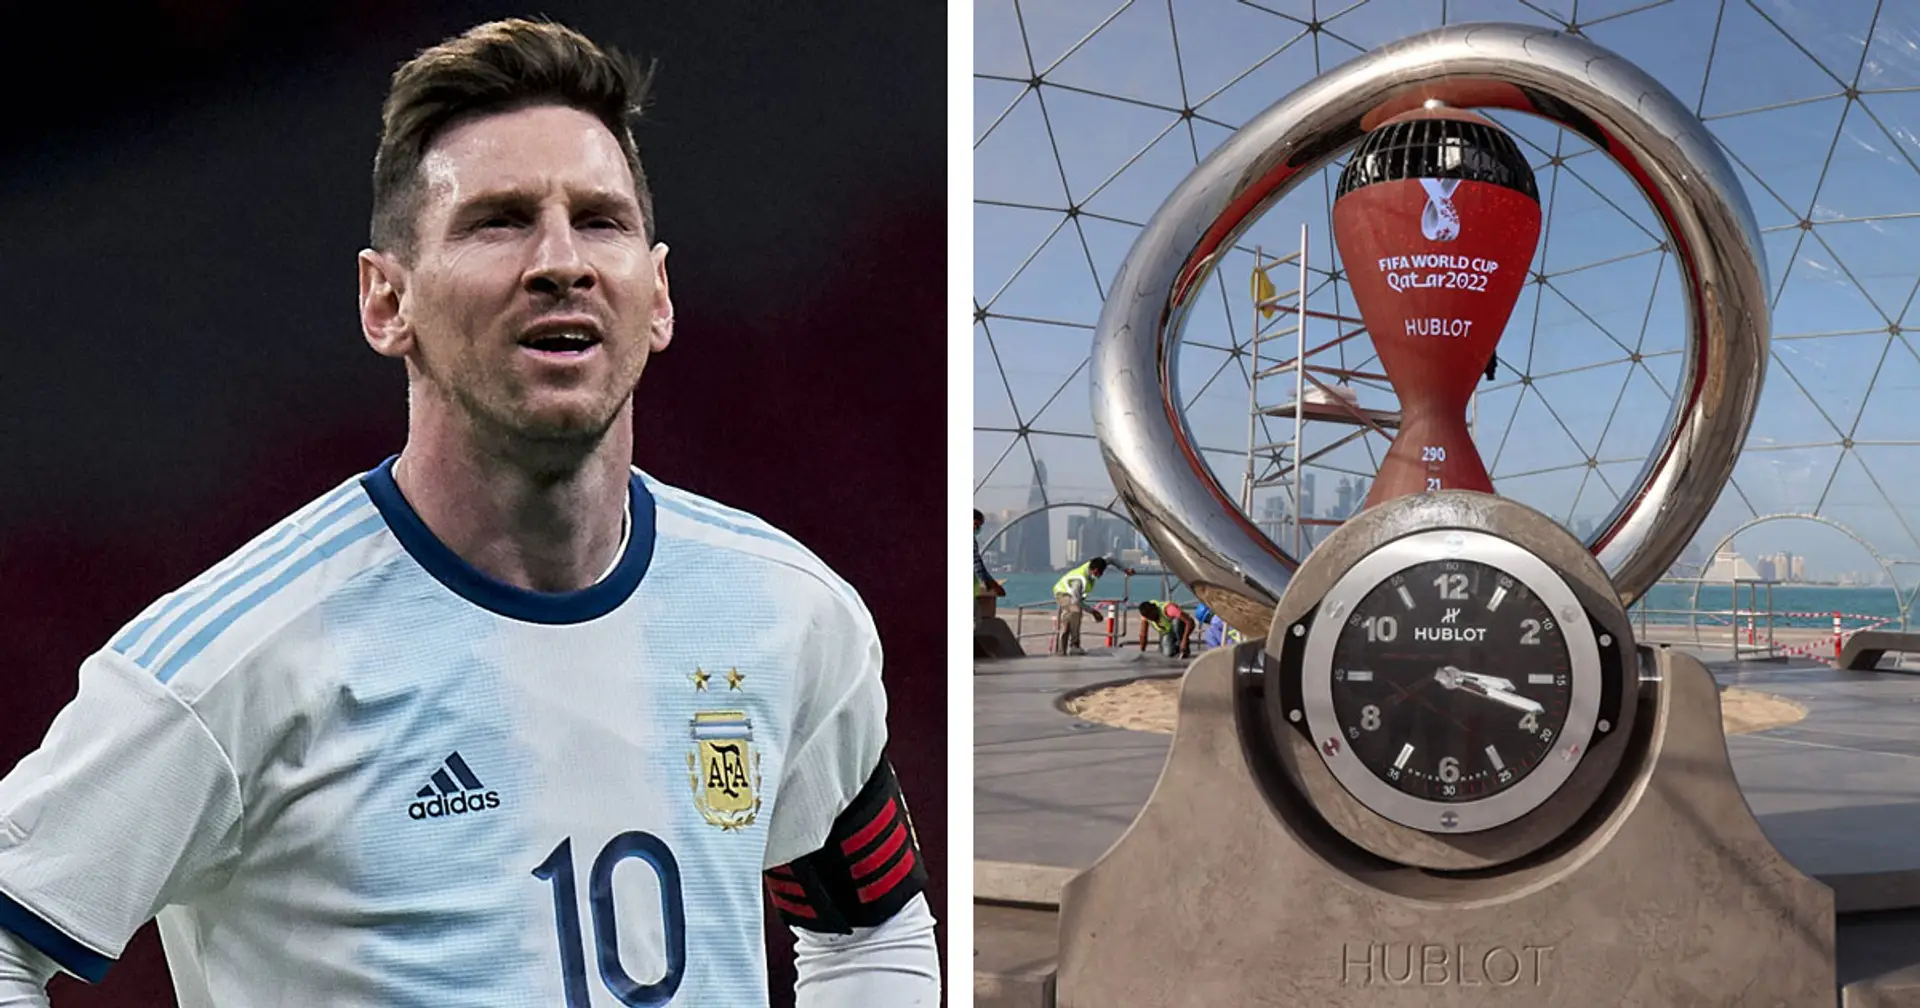 'I'm thinking about what's coming next': Messi hints at international retirement after Qatar World Cup